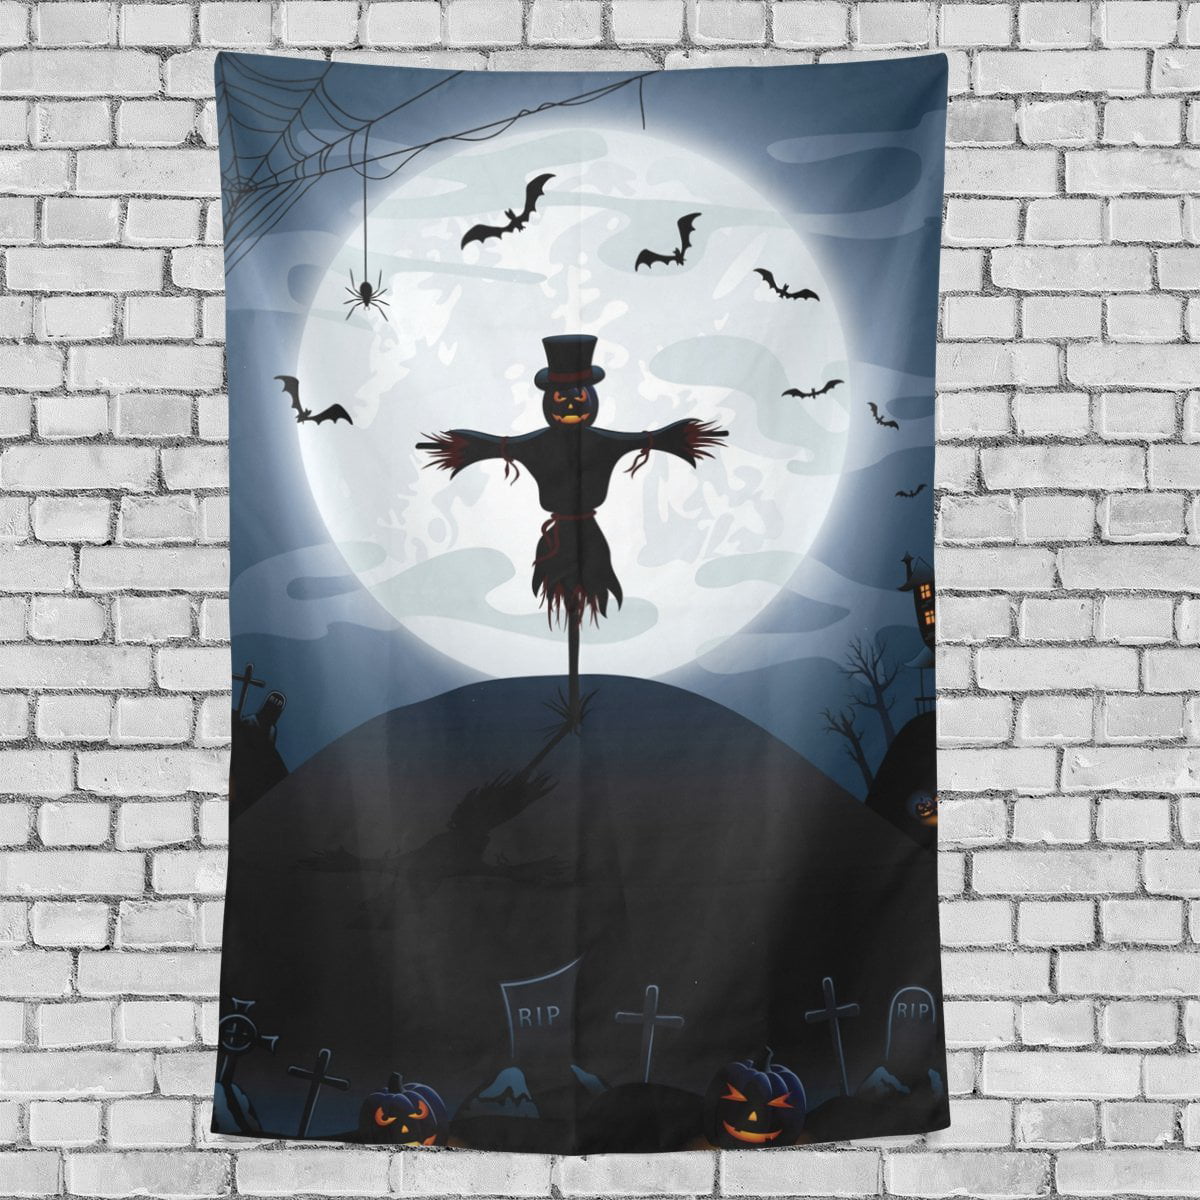 Wall Hanging Tapestry Halloween Scarecrow Party Livingroom Sheet Bedspread Decor 